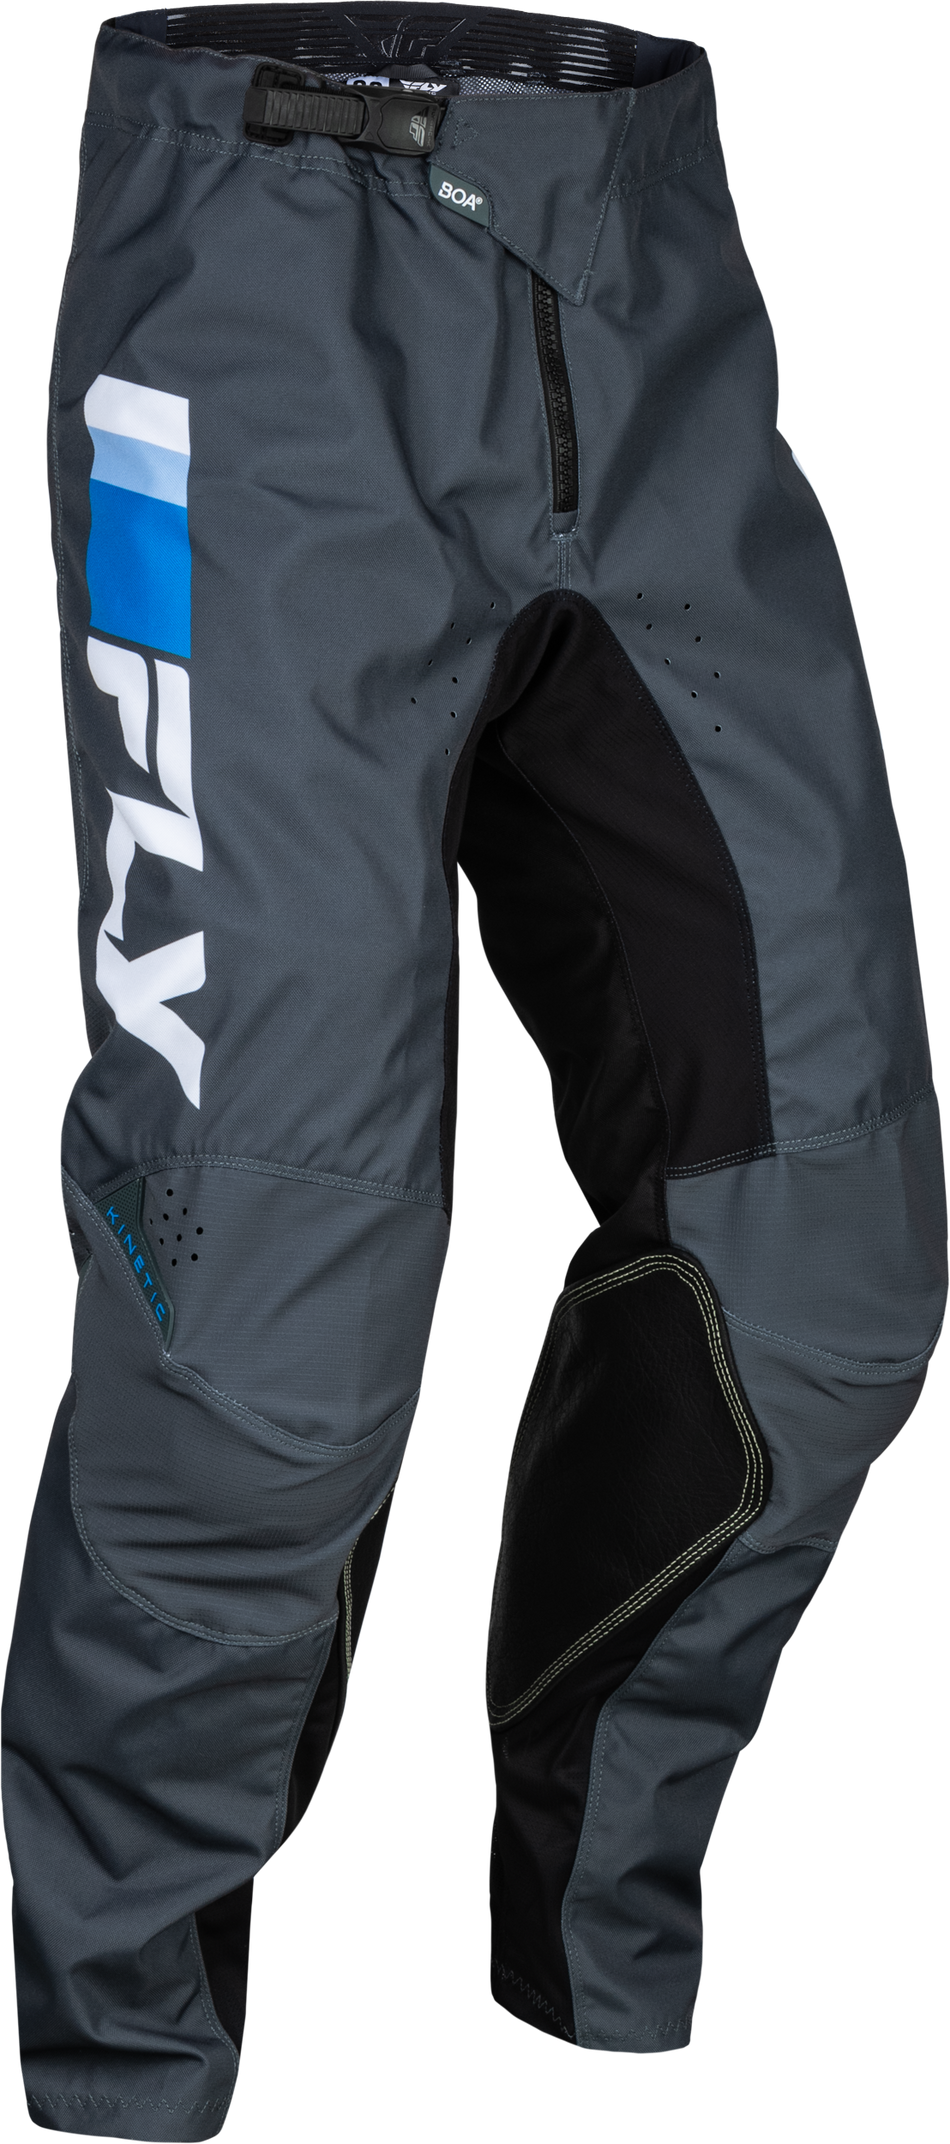 FLY RACING Youth Kinetic Prix Pants Bright Blue/Charcoal/Wht Sz 26 377-43026